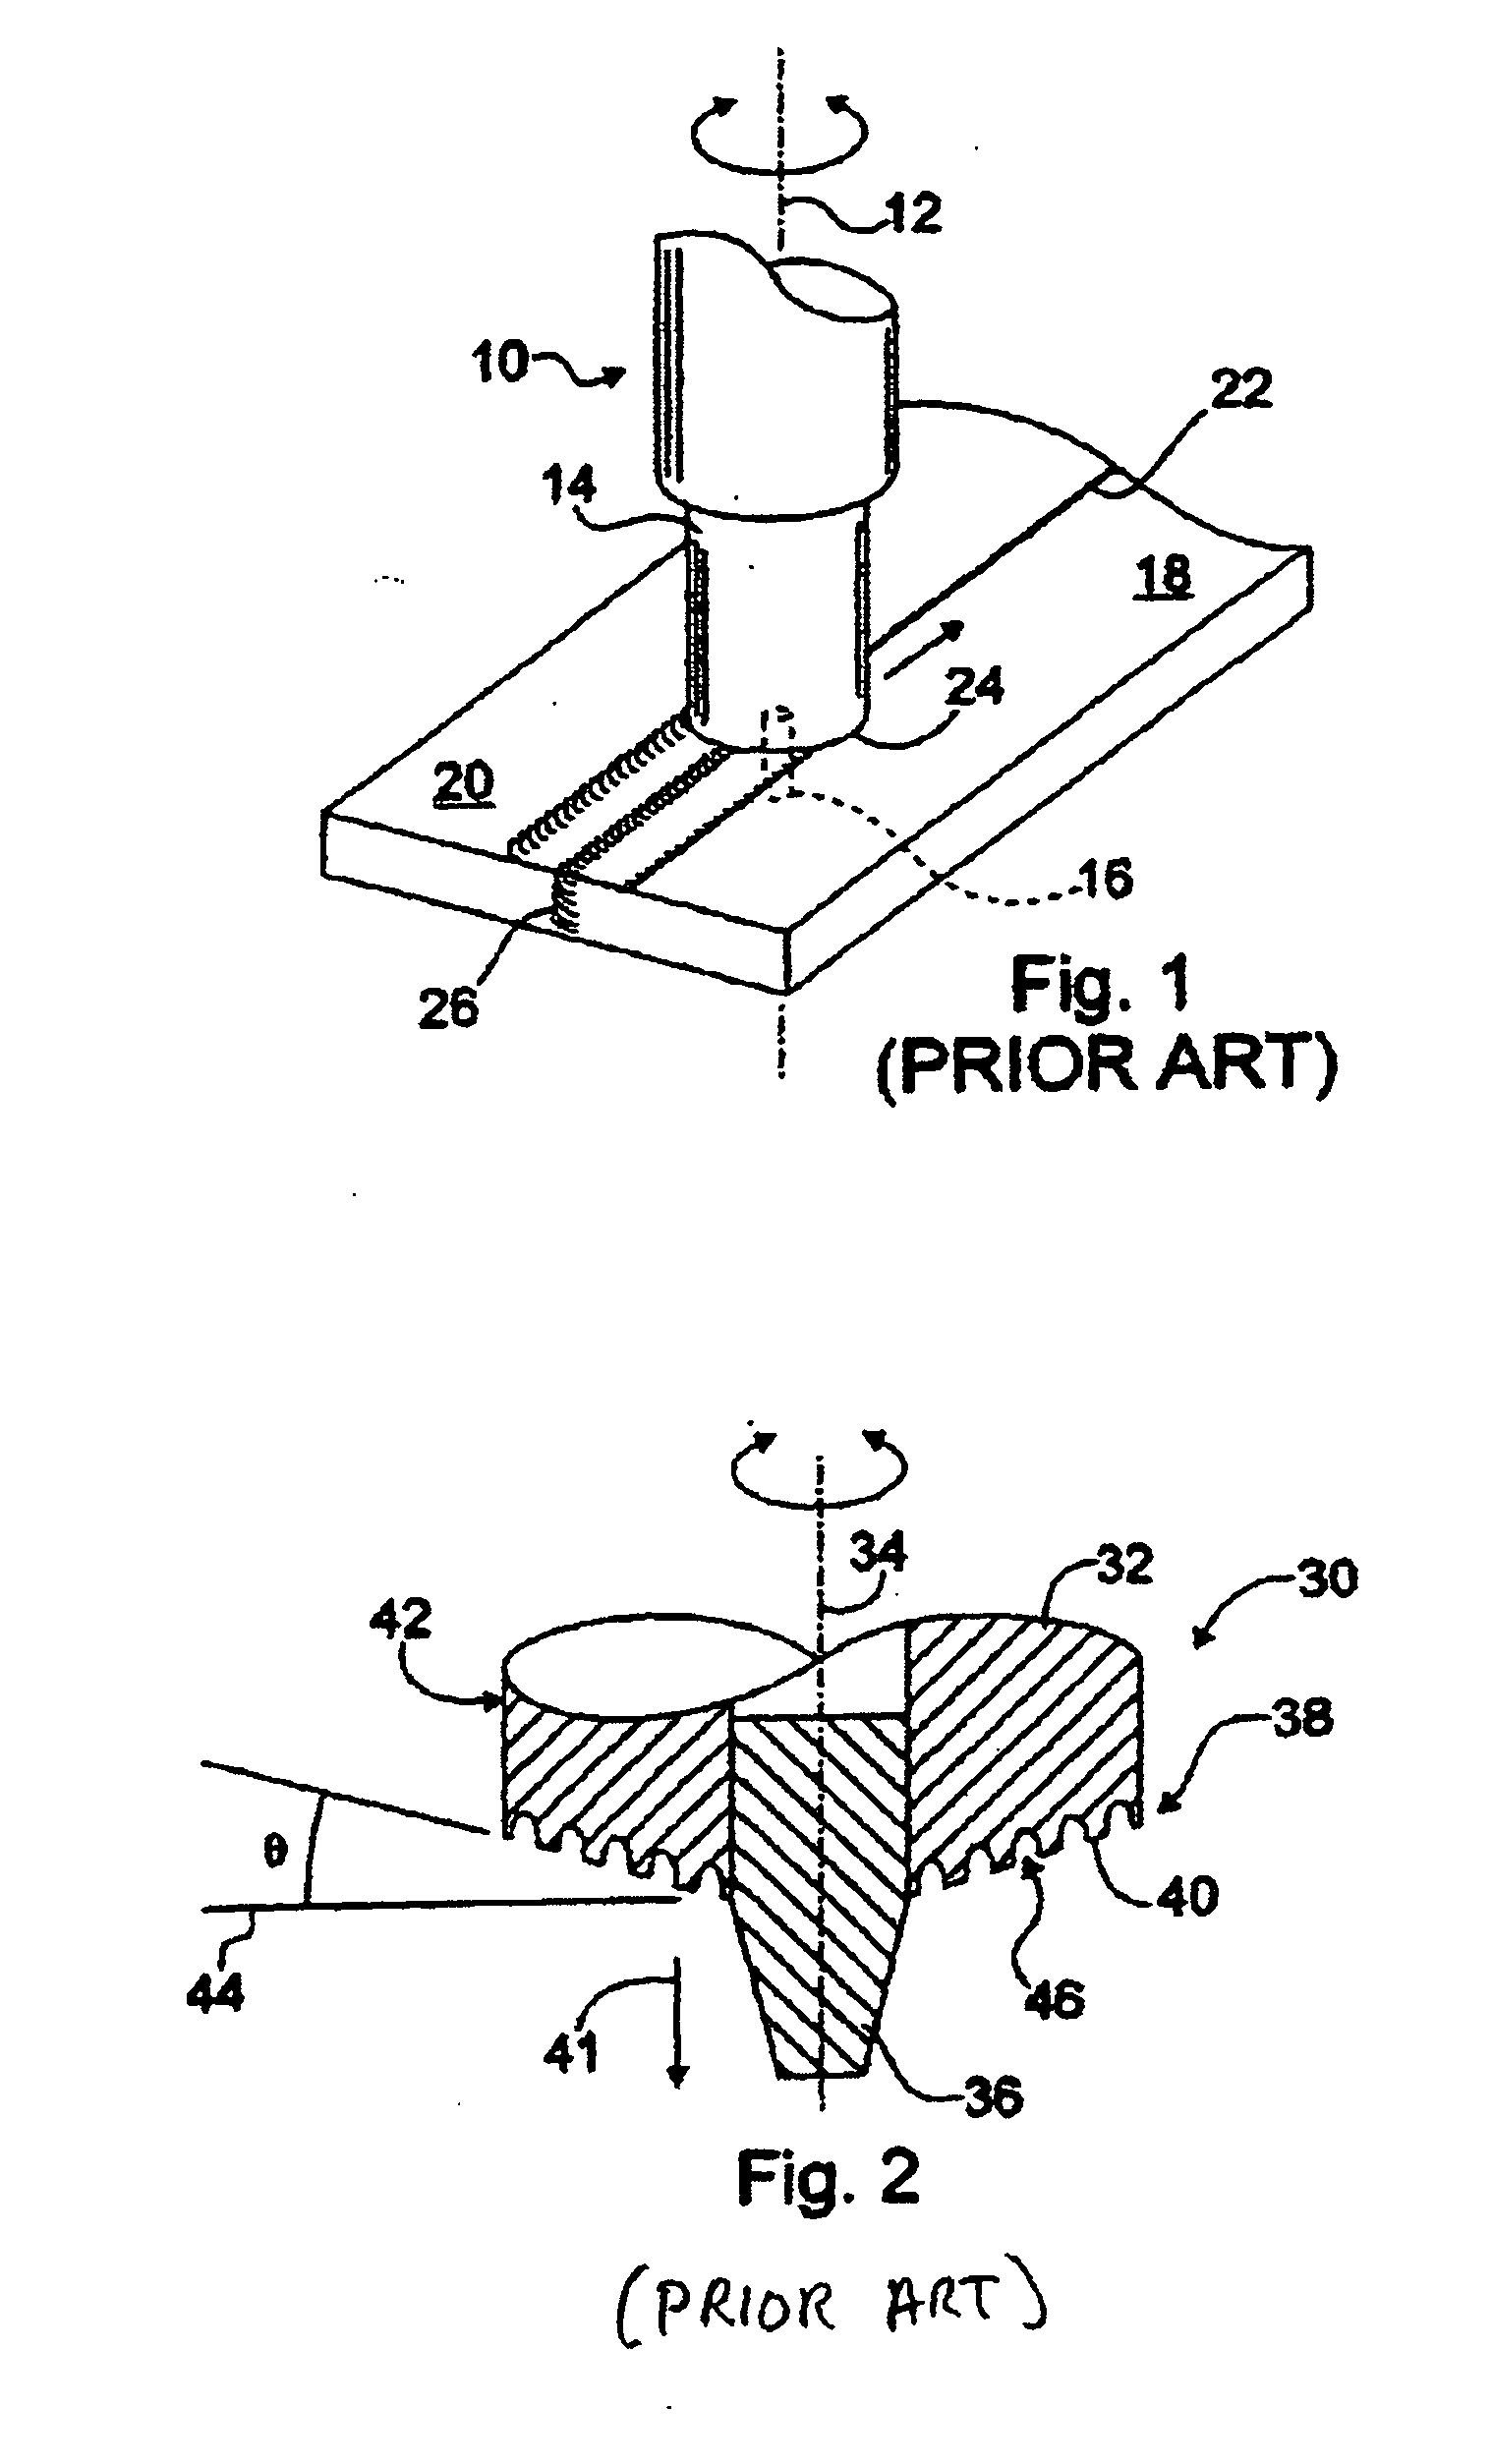 Tapered friction stir welding and processing tool